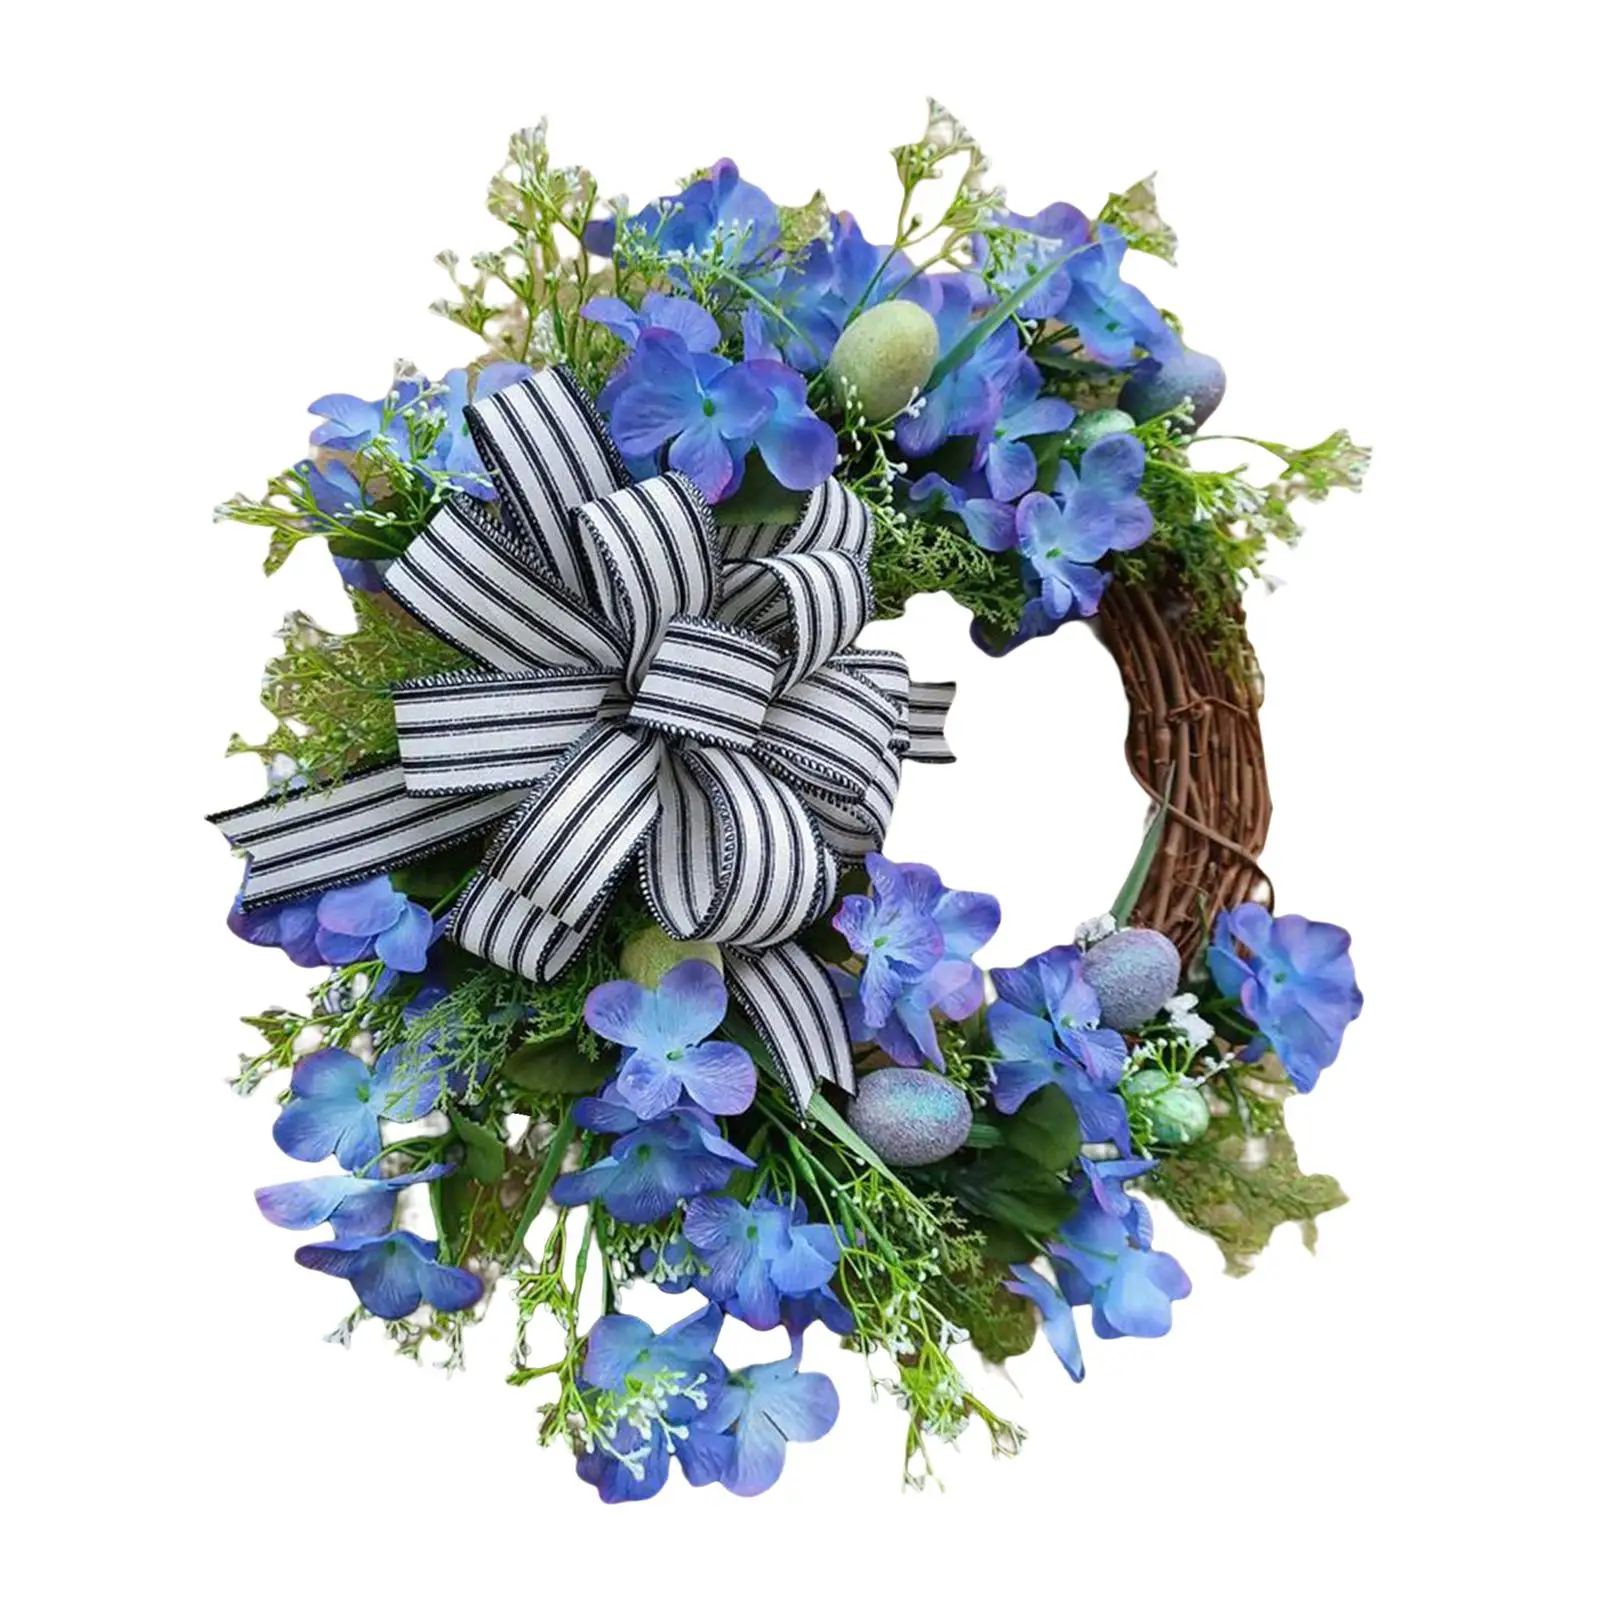 

45cm Easter Egg Wreath Garland Striped Bowknot Greenery Wreaths Artificial Flower Wreath Hanging Ornament for Porch Home Decor